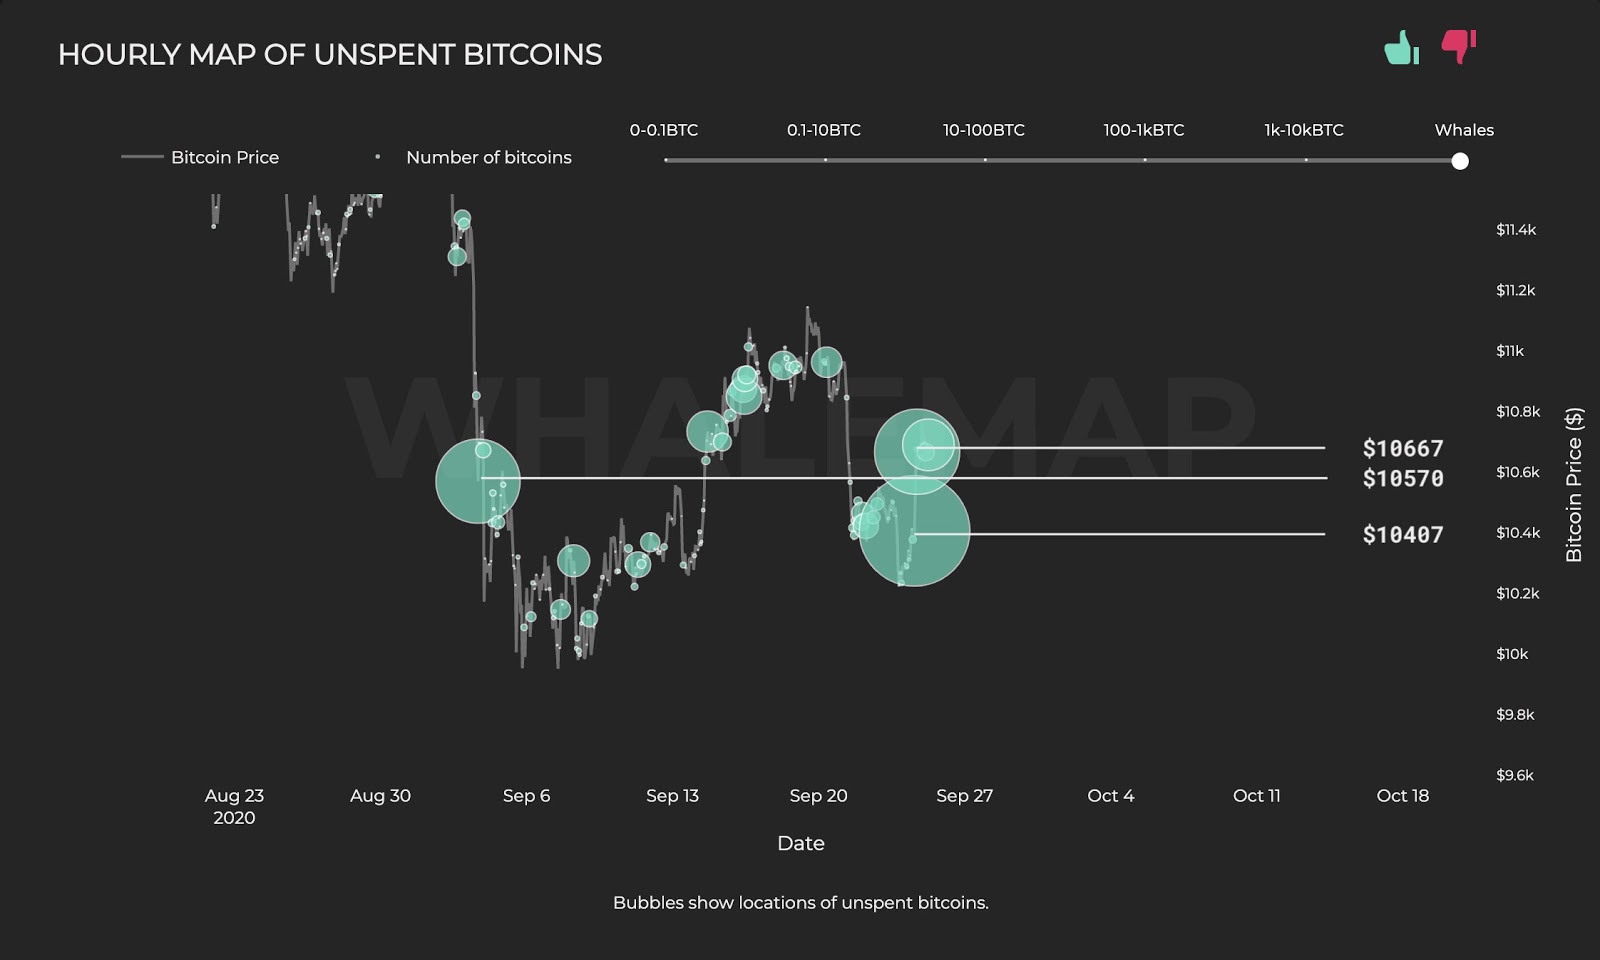 The hourly map of Bitcoin whale clusters